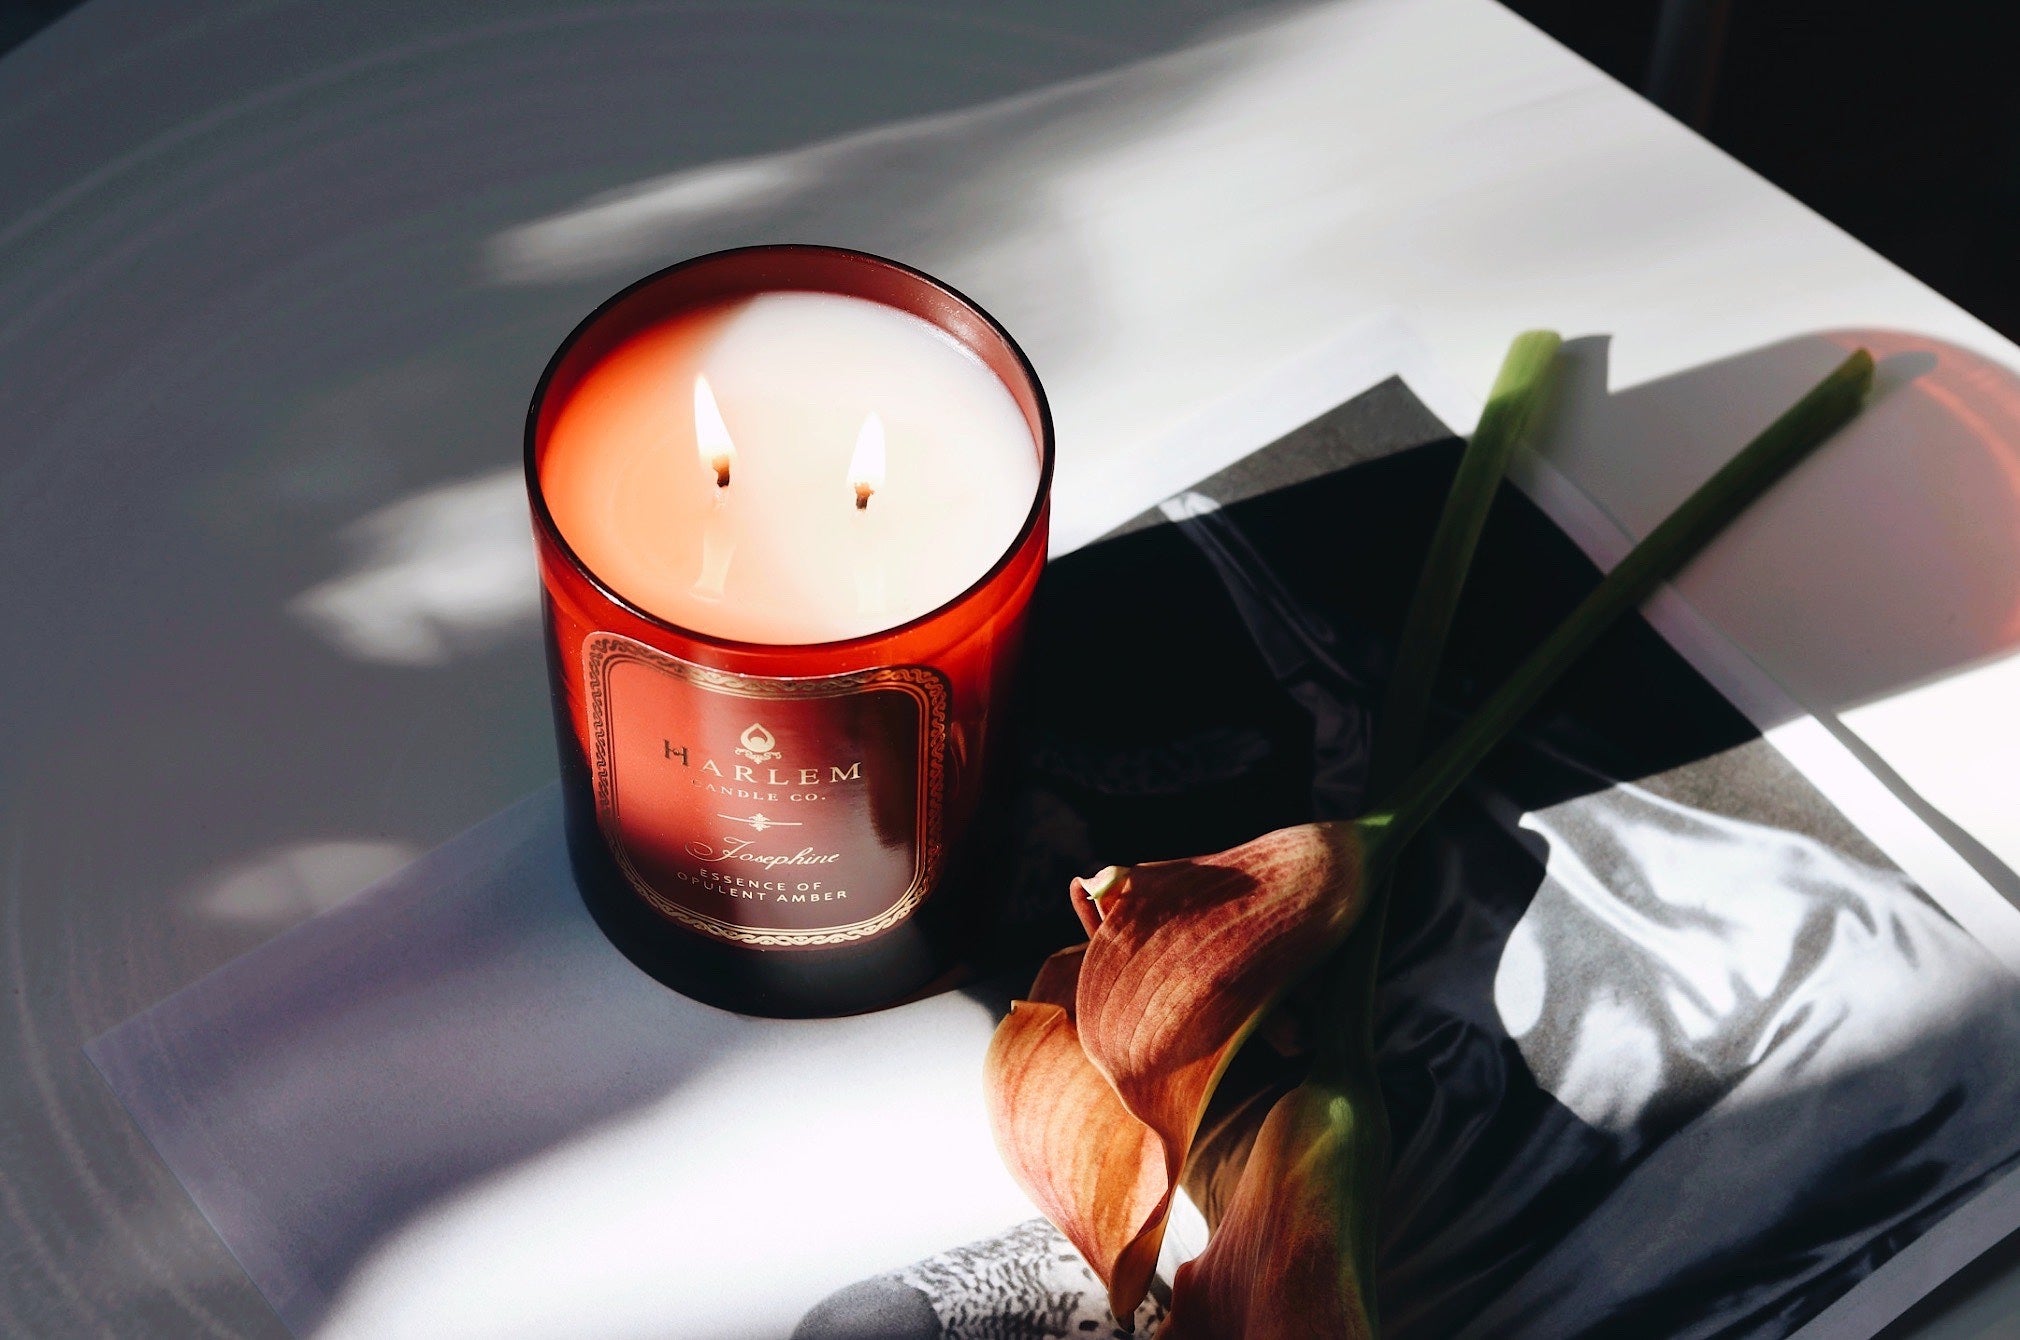 This is a lifestyle image of our Josephine candle illuminated next to flowers